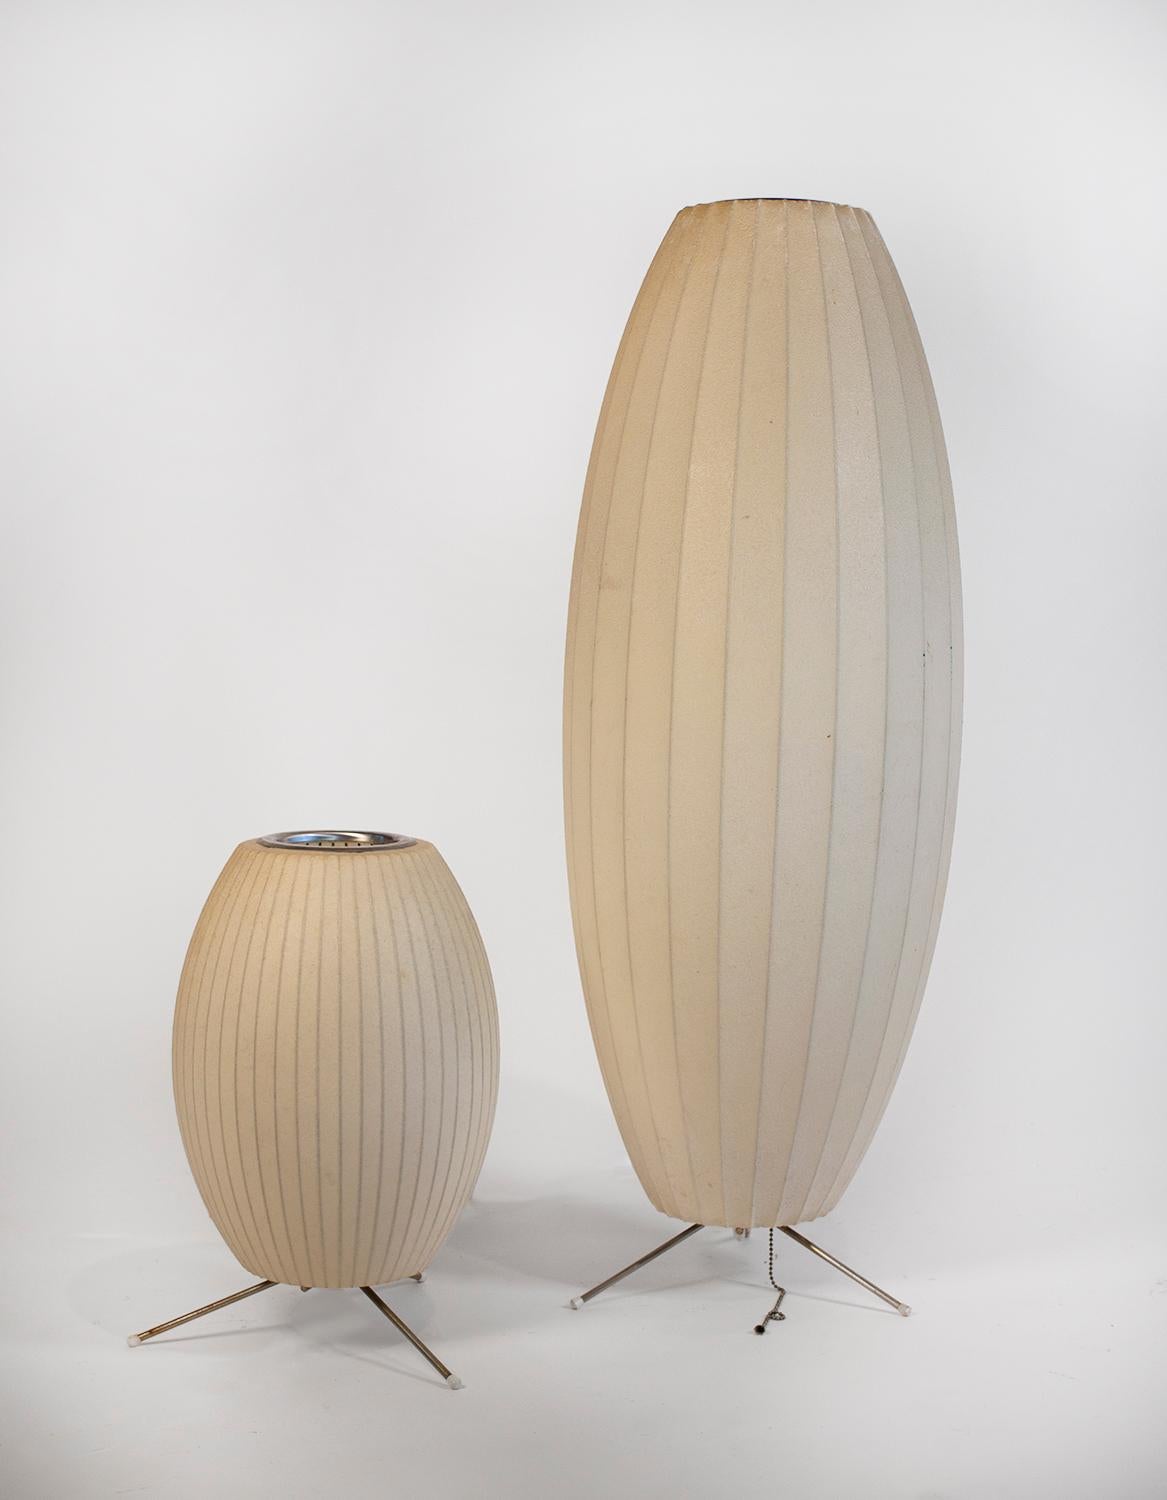 Pair of George Nelson designed bubble lamps for Howard Miller.

Both are original tabletop models from the 1960s with the tripod base.
Acquired from an architect's estate.
Original feet intact.

Measures: Small lamp: 16